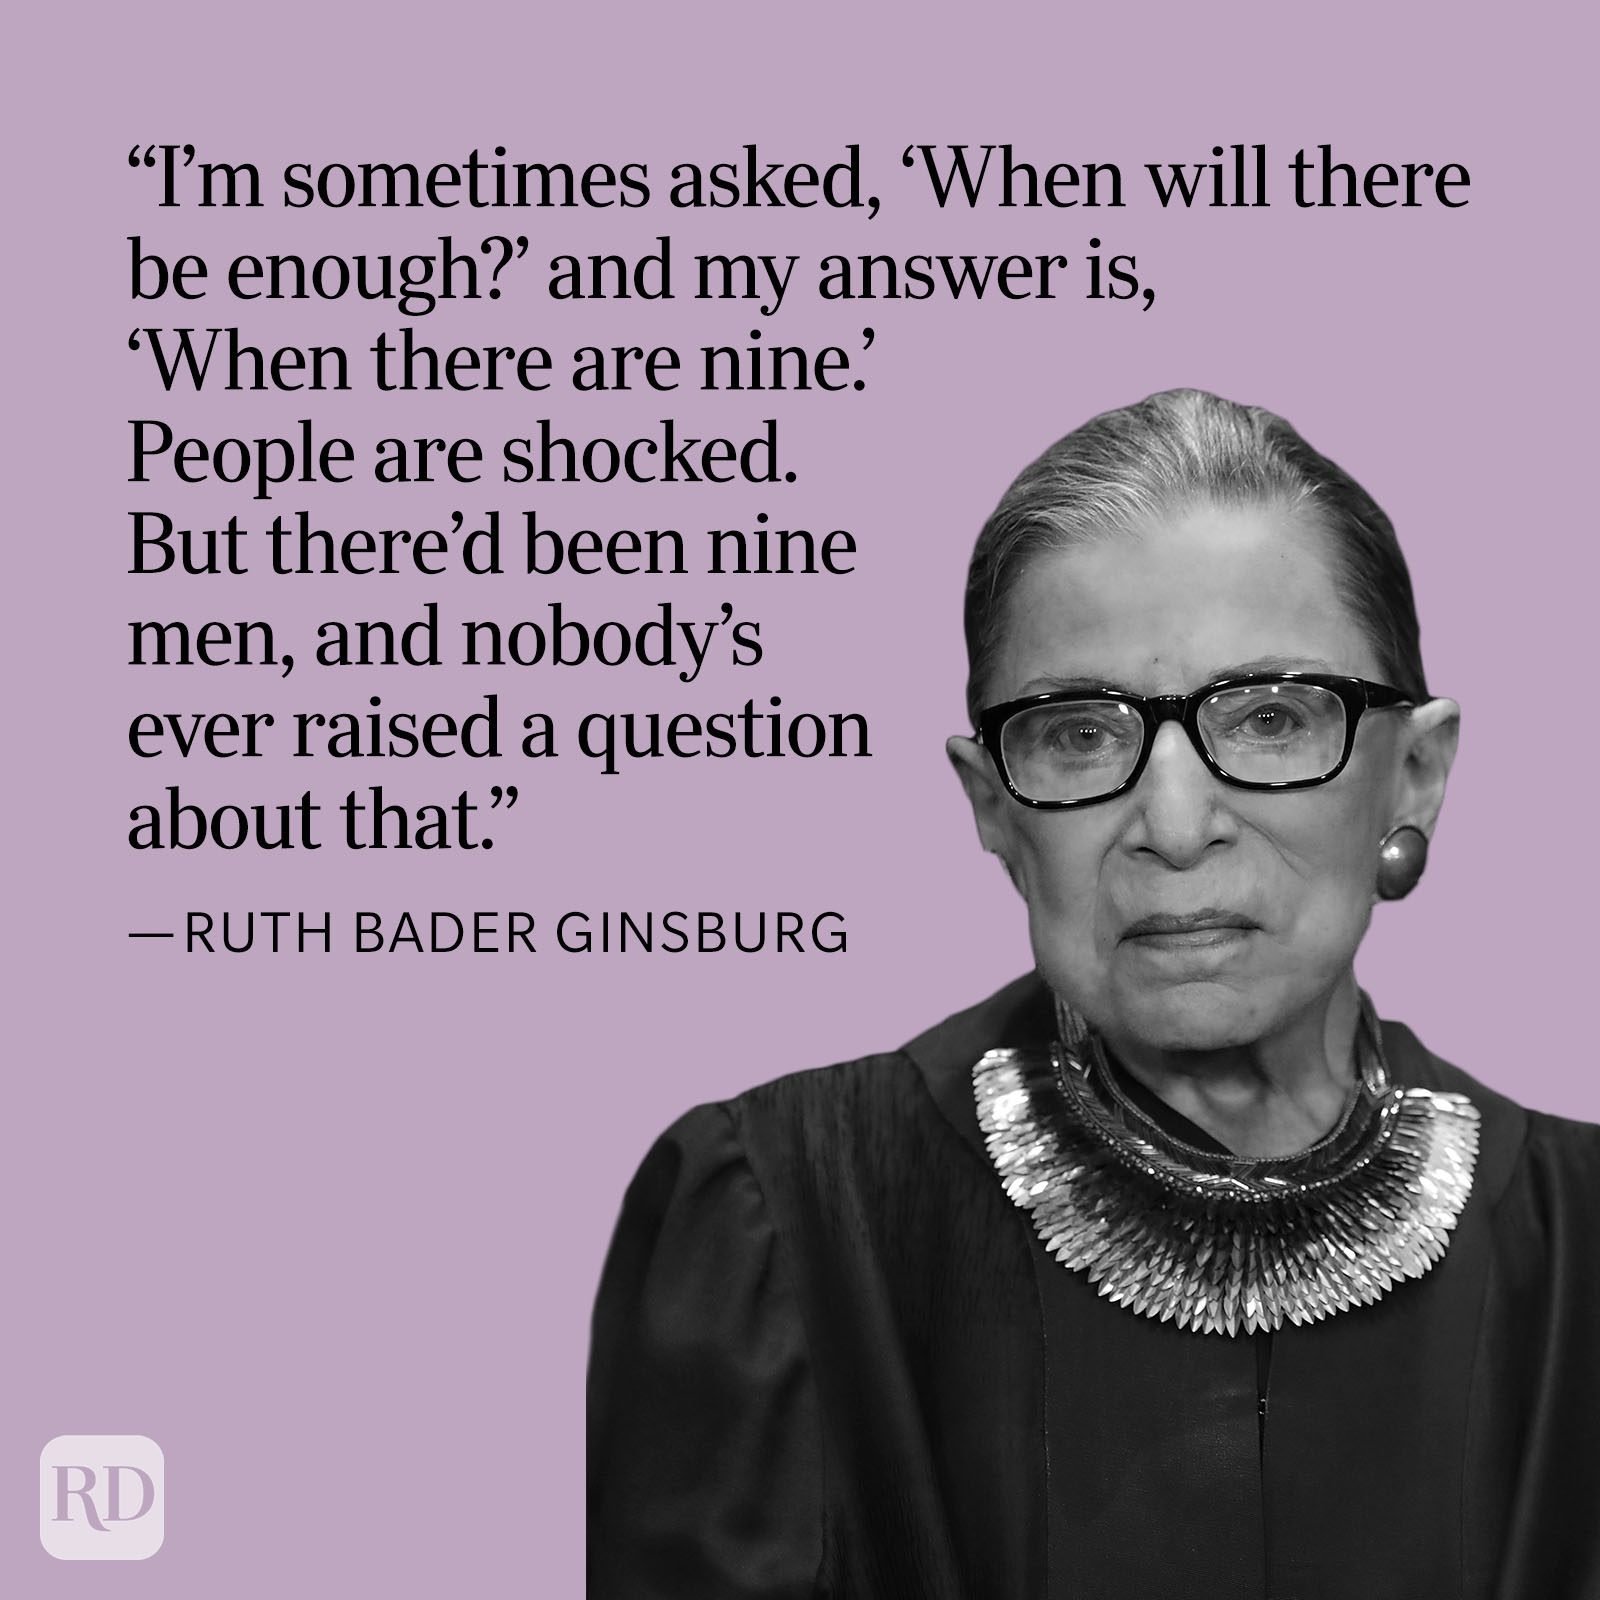 30 Iconic Ruth Bader Ginsburg Quotes on Women, Equality, and Justice